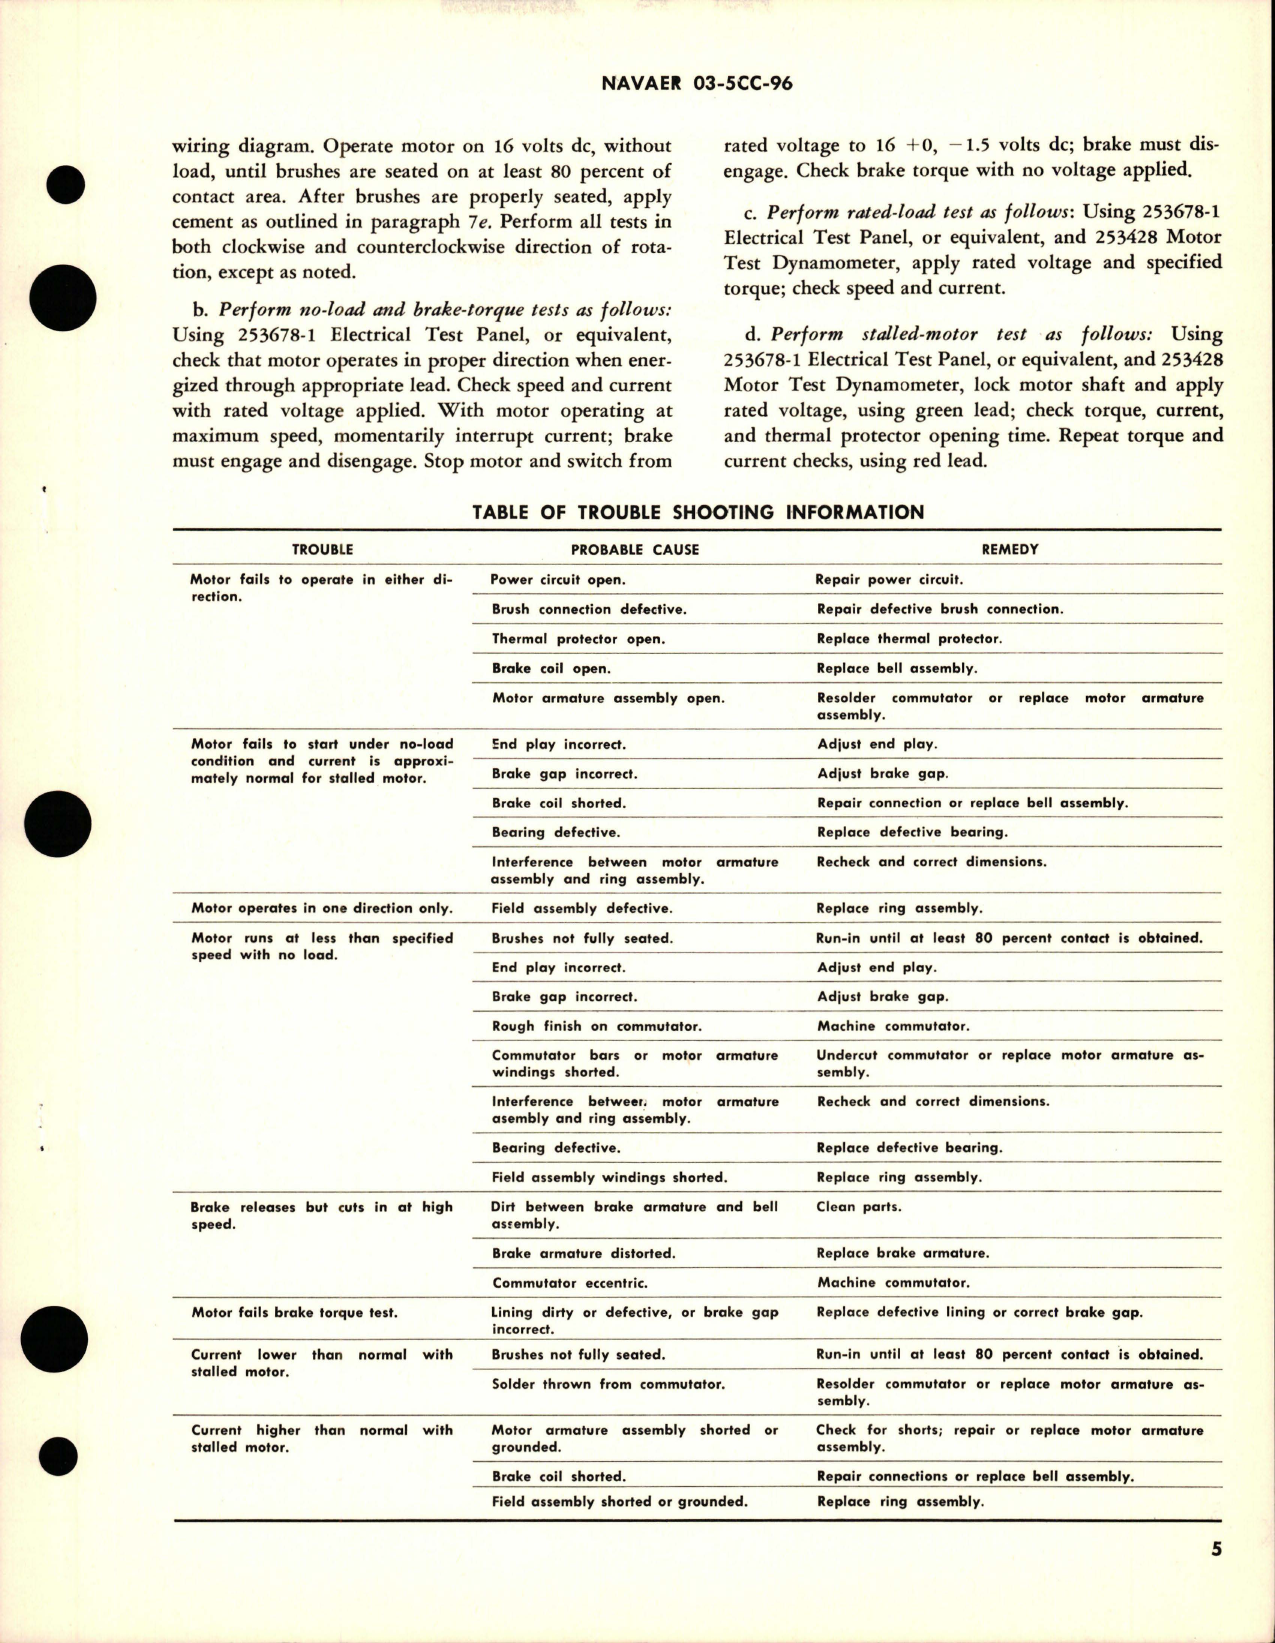 Sample page 5 from AirCorps Library document: Overhaul Instructions with Parts Breakdown for Direct-Current Motor 0.15 HP 26 Volt